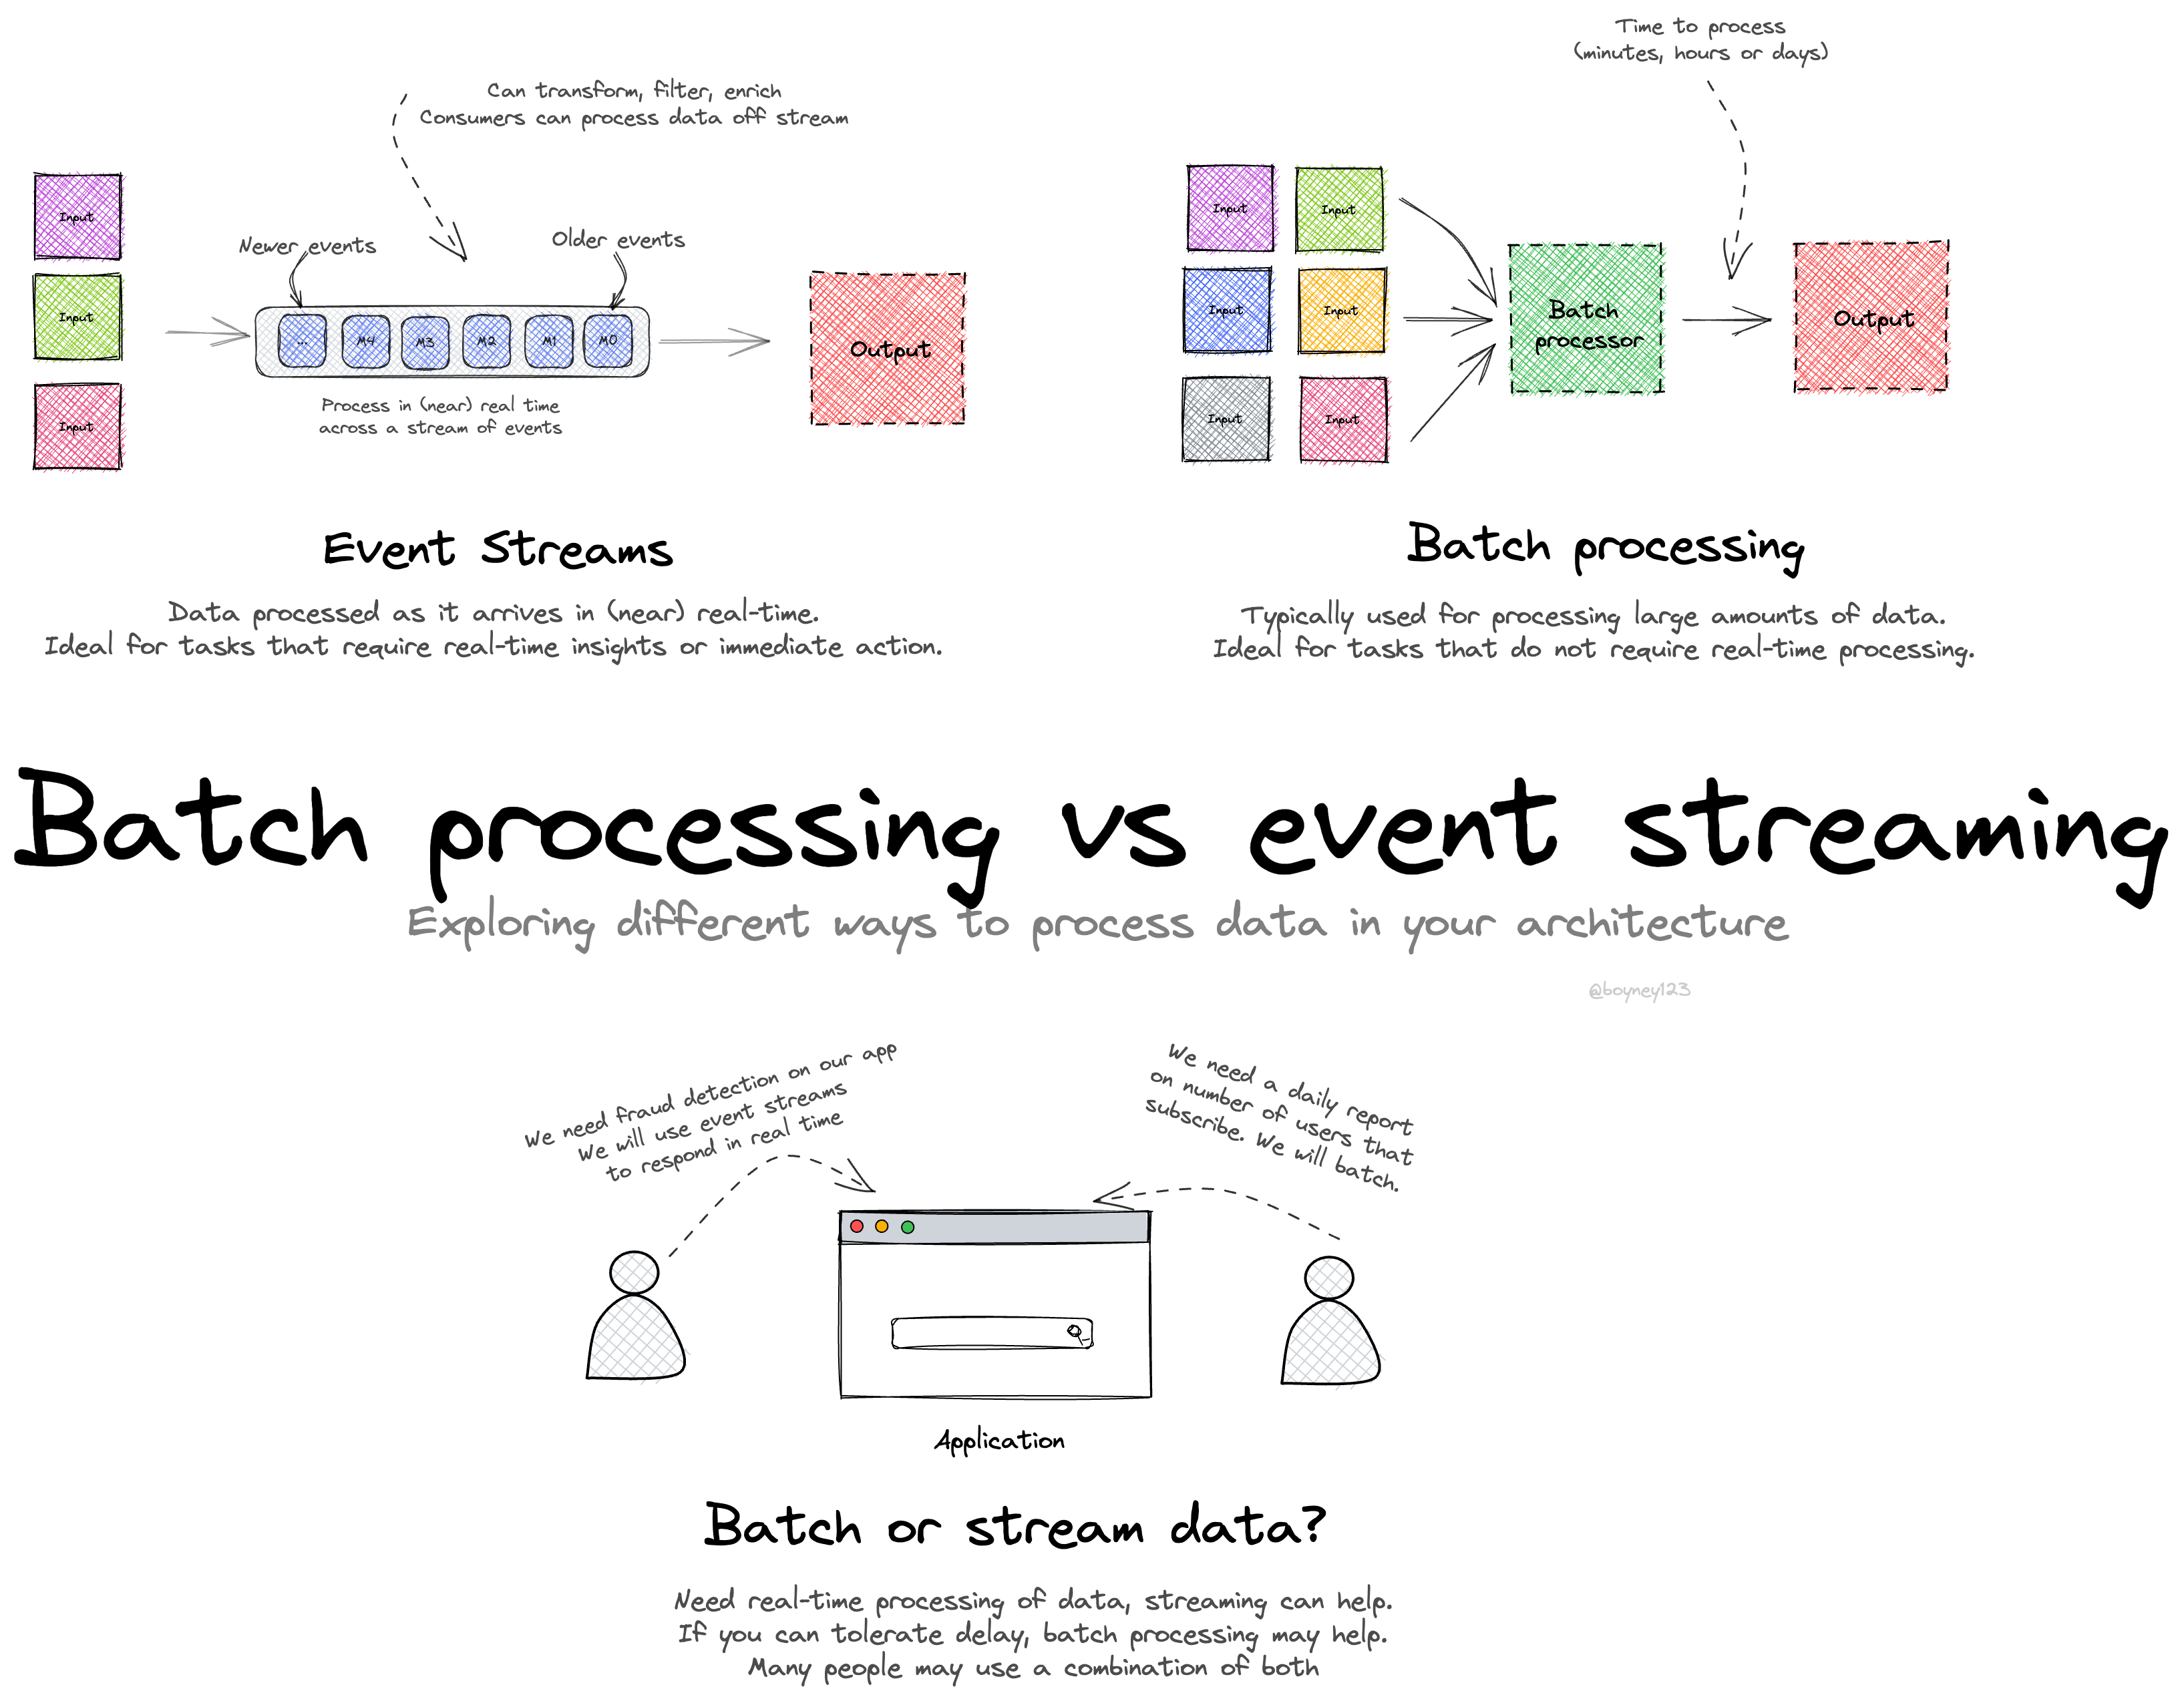 Batch processing vs event streaming